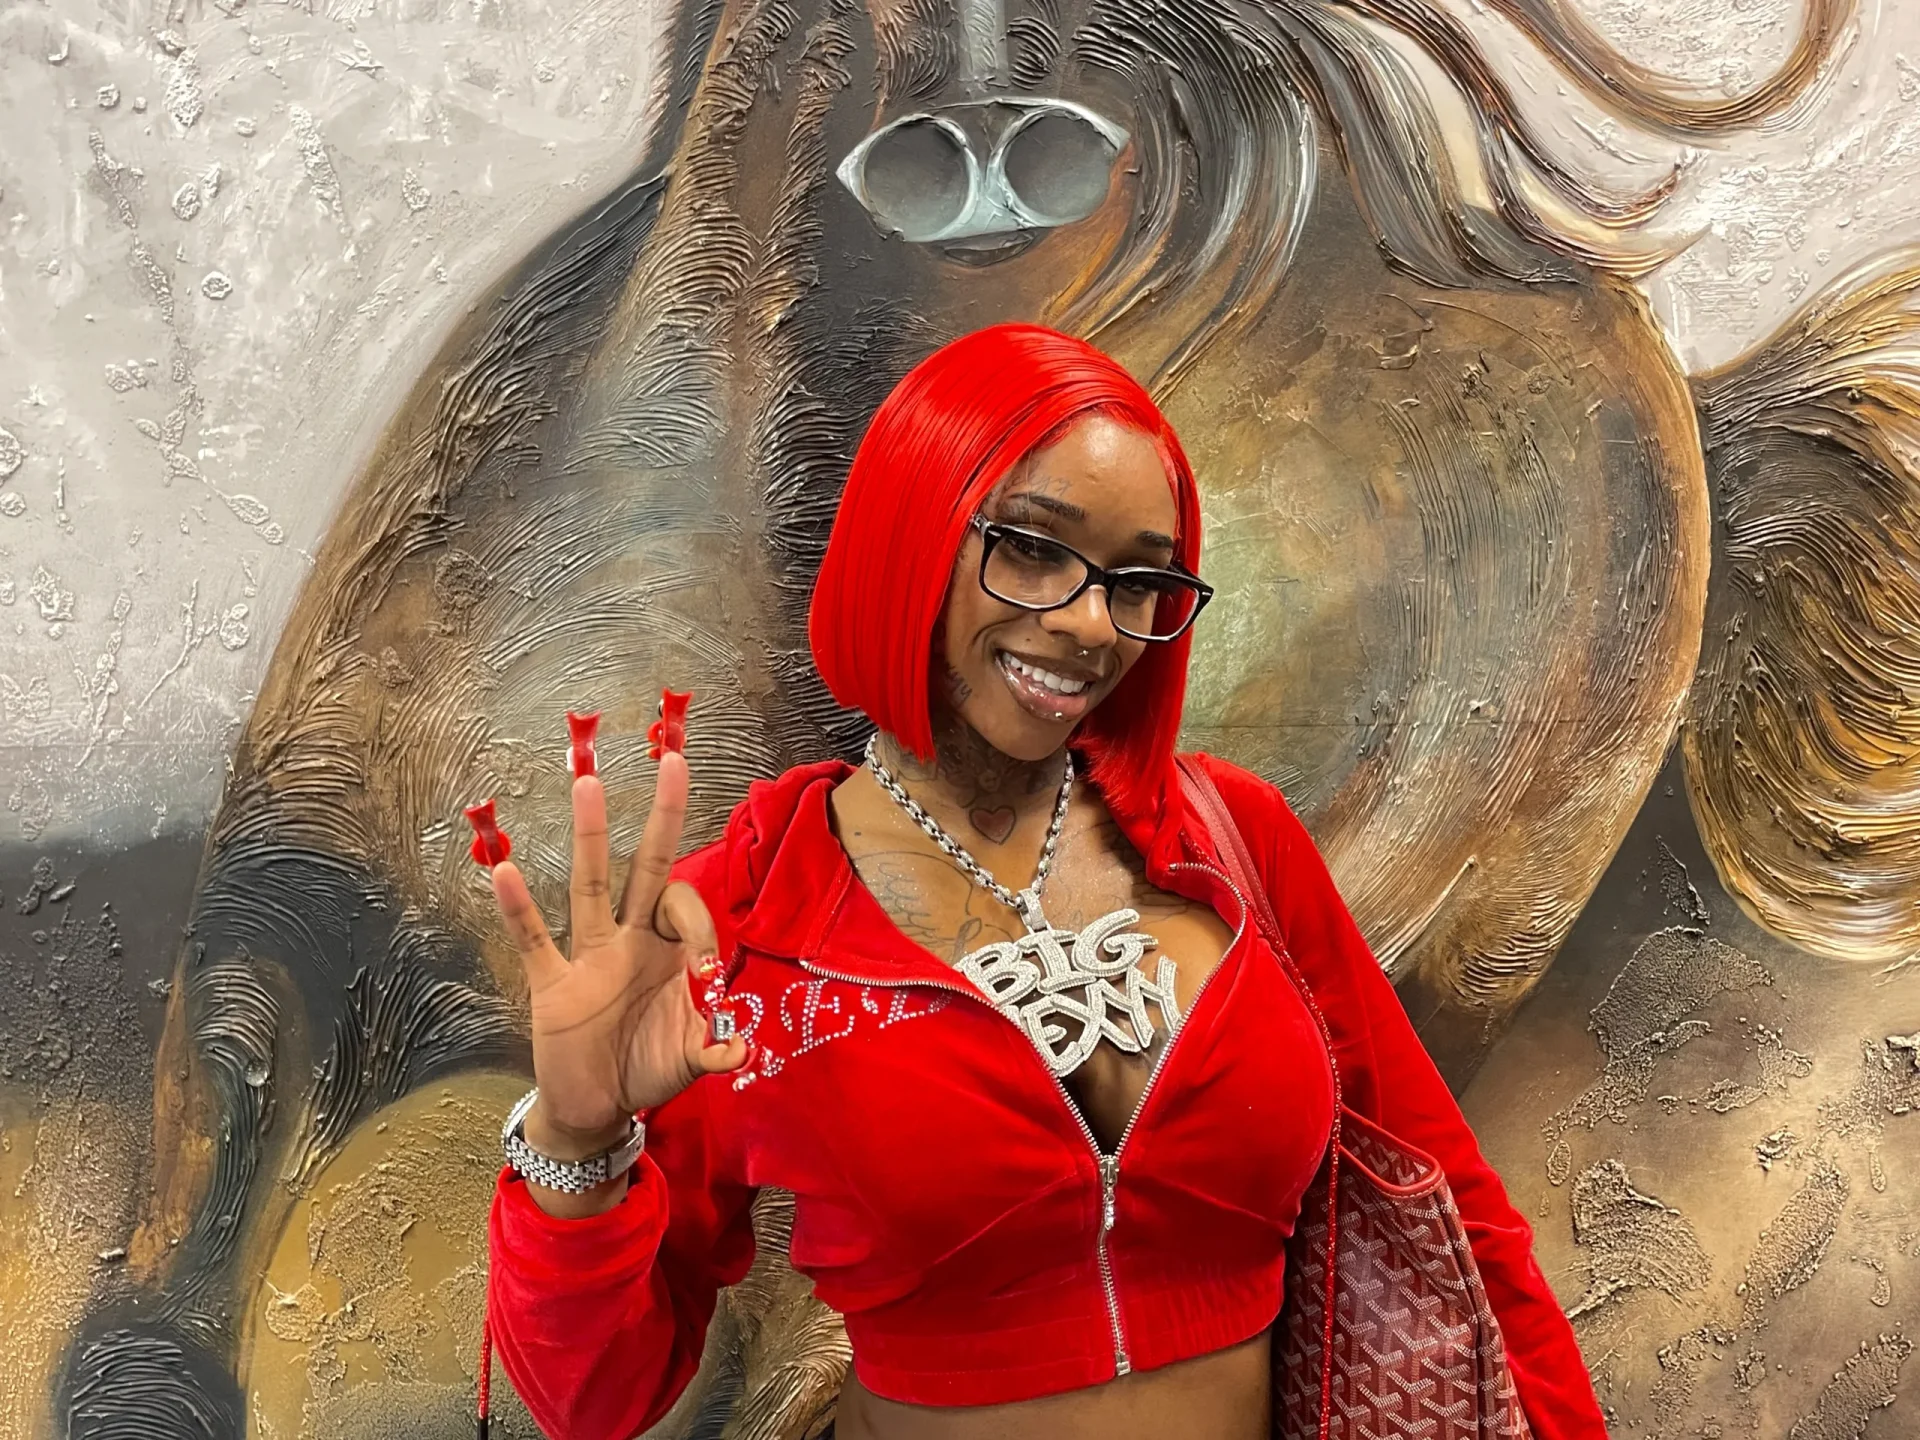 Blueface’s sister claims Sexyy Red stole her song